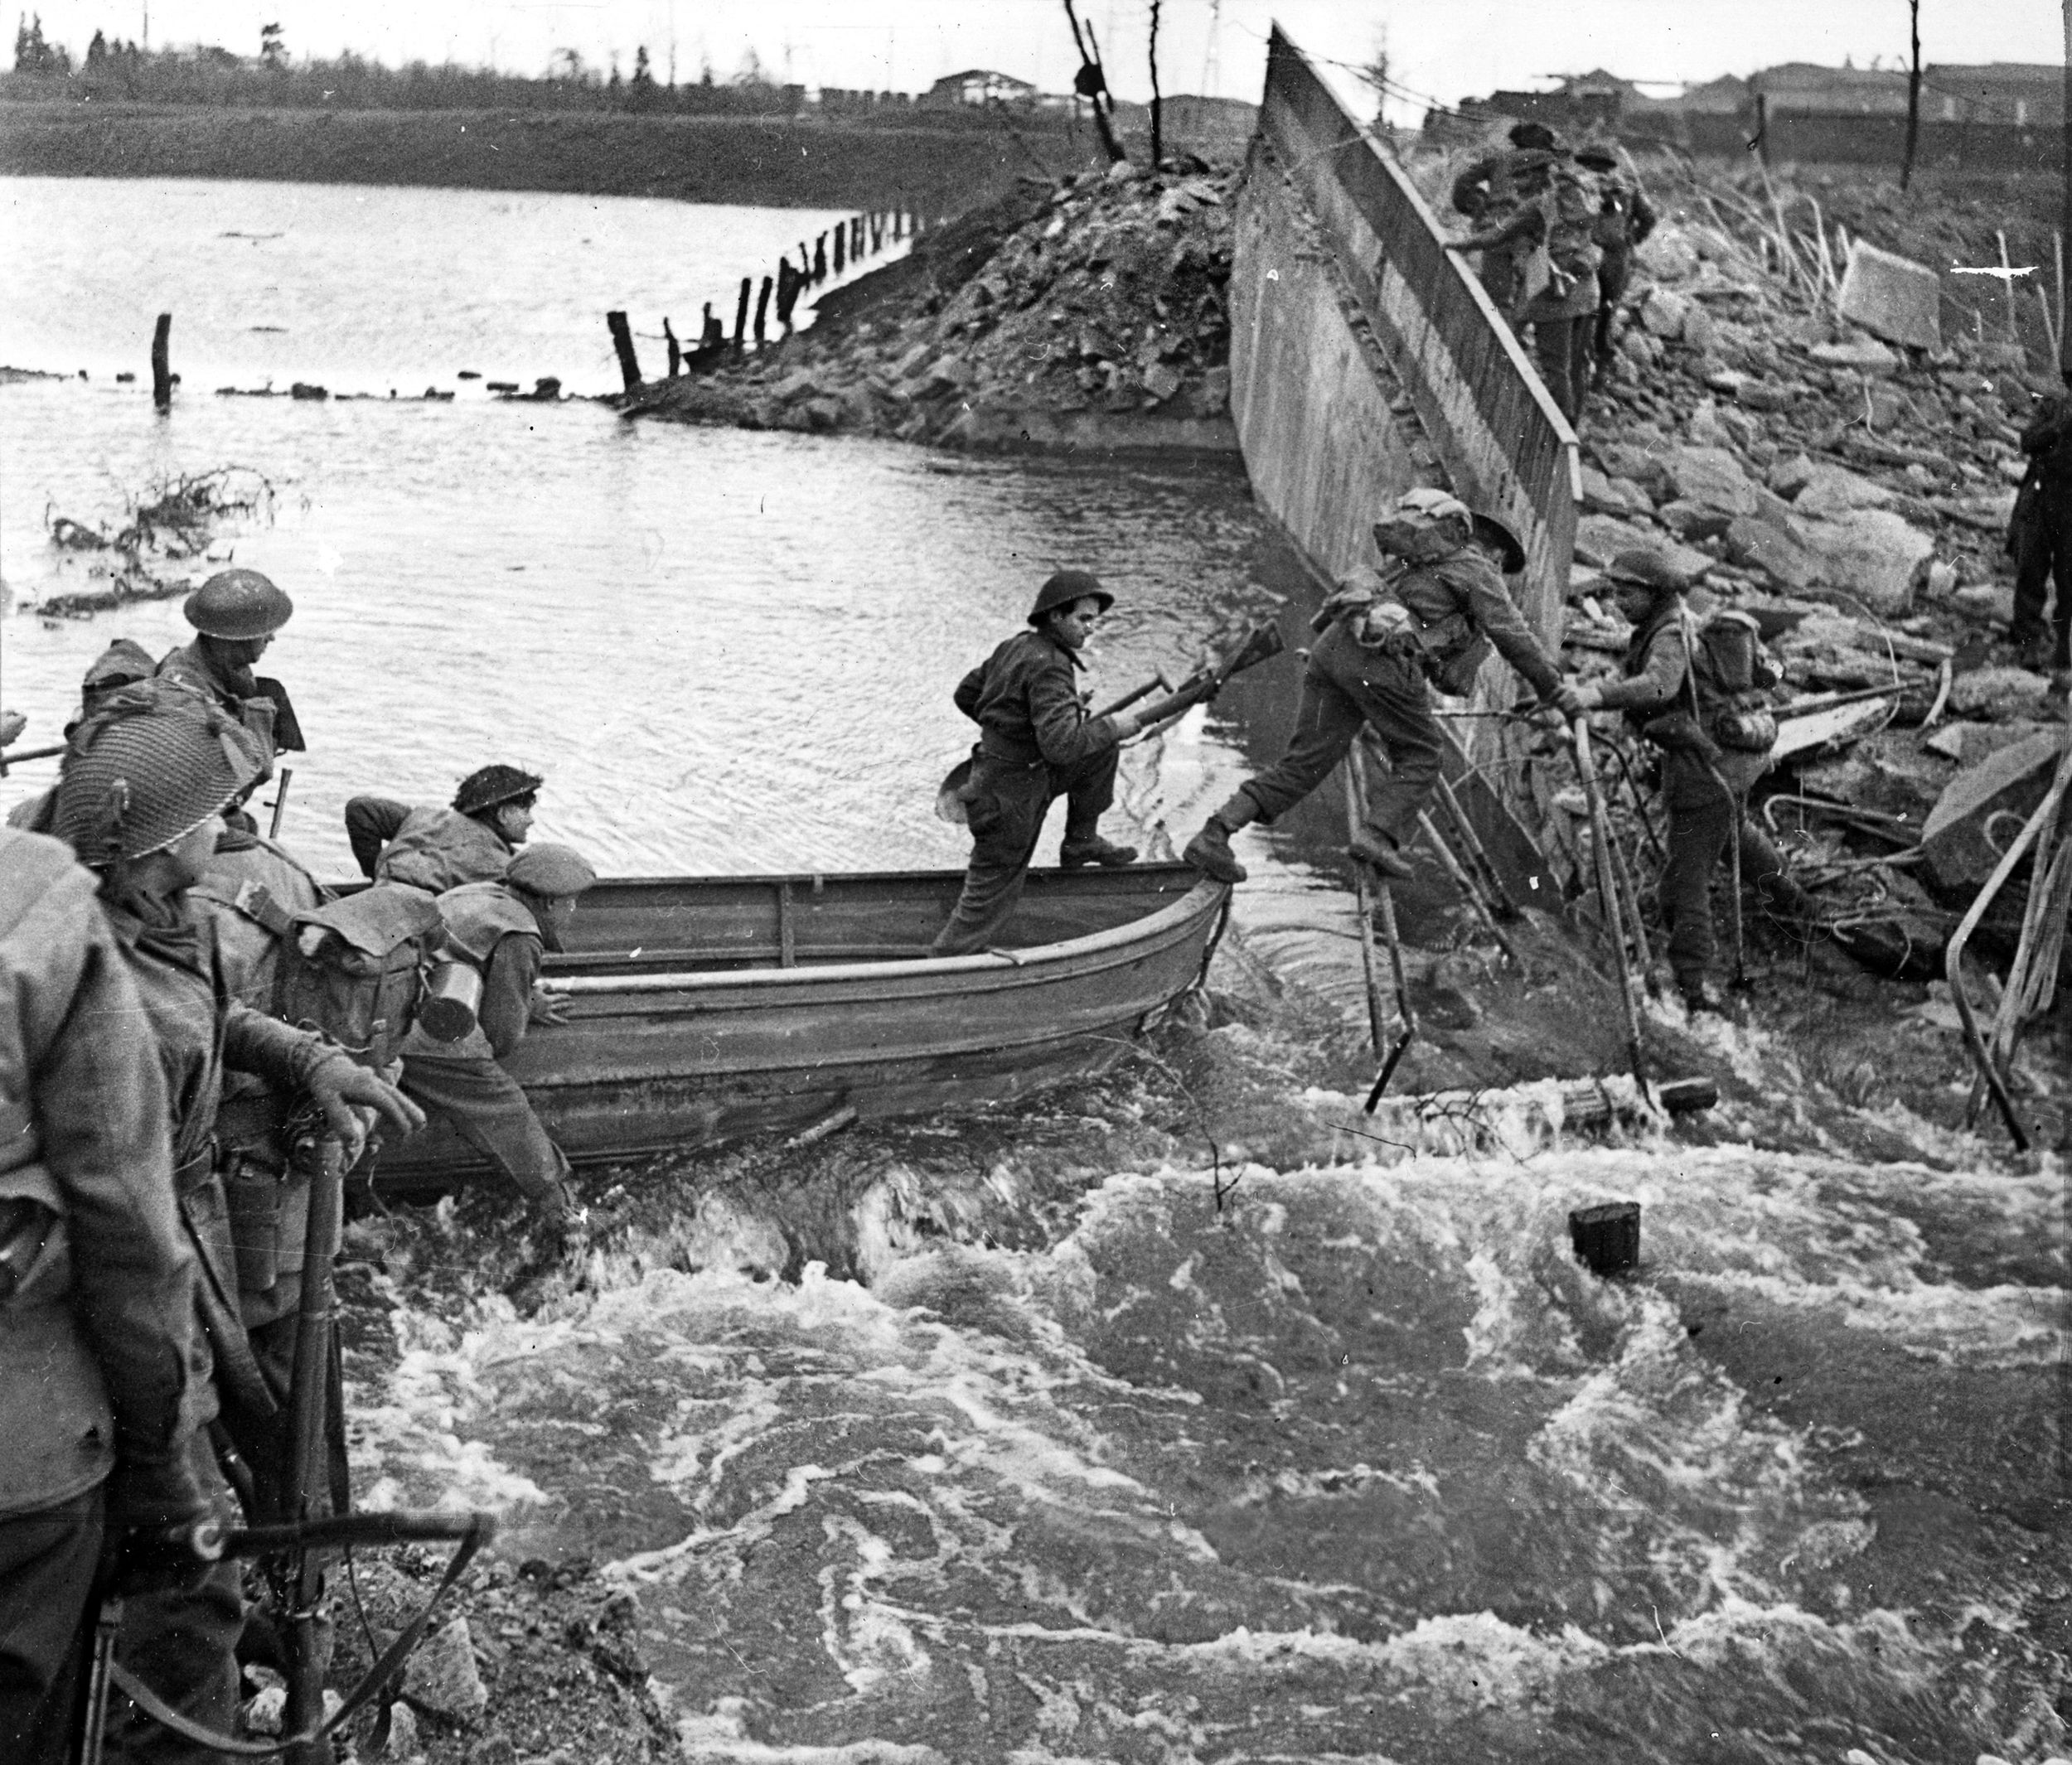 British soldiers cross the Niers River on March 2, 1945, heading for the nearby town of Weeze, Germany. The Germans disabled dams to allow normally small rivers to overflow their banks. Some floodwaters took as long as two weeks to recede.